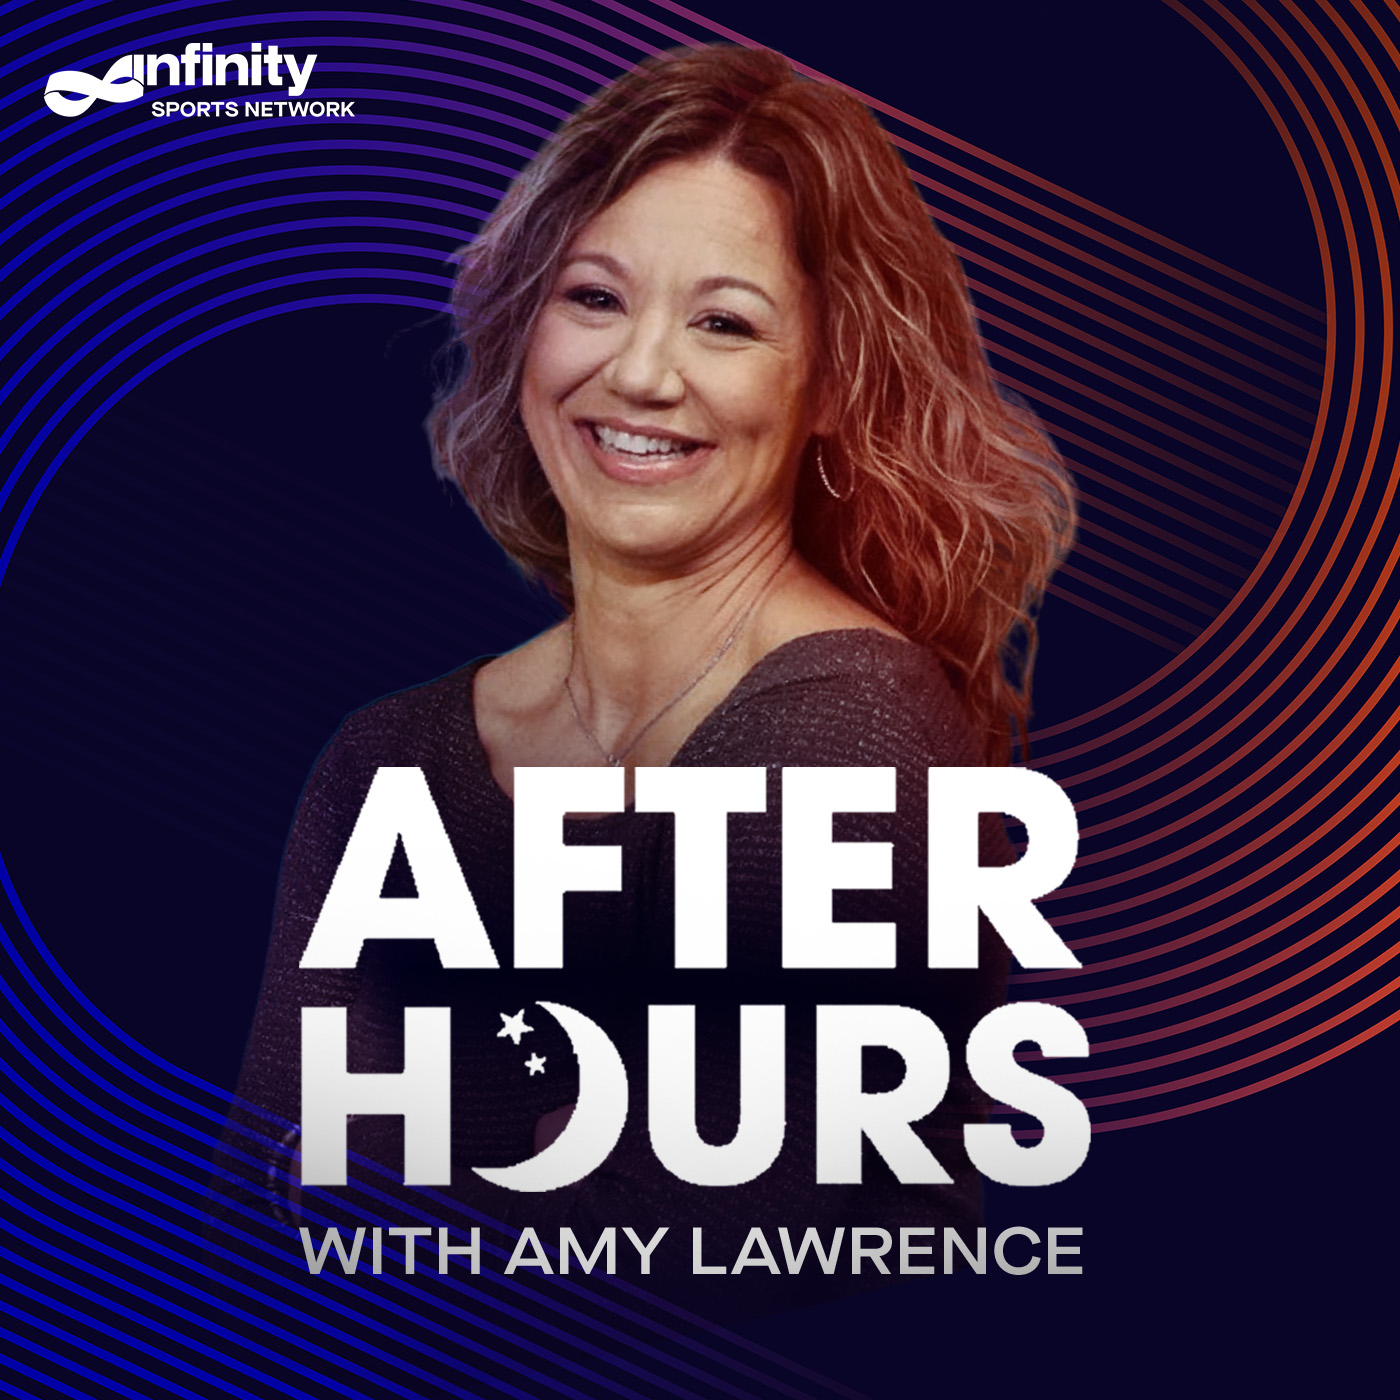 2/25/21 After Hours with Lawrence PODCAST: Hour 4